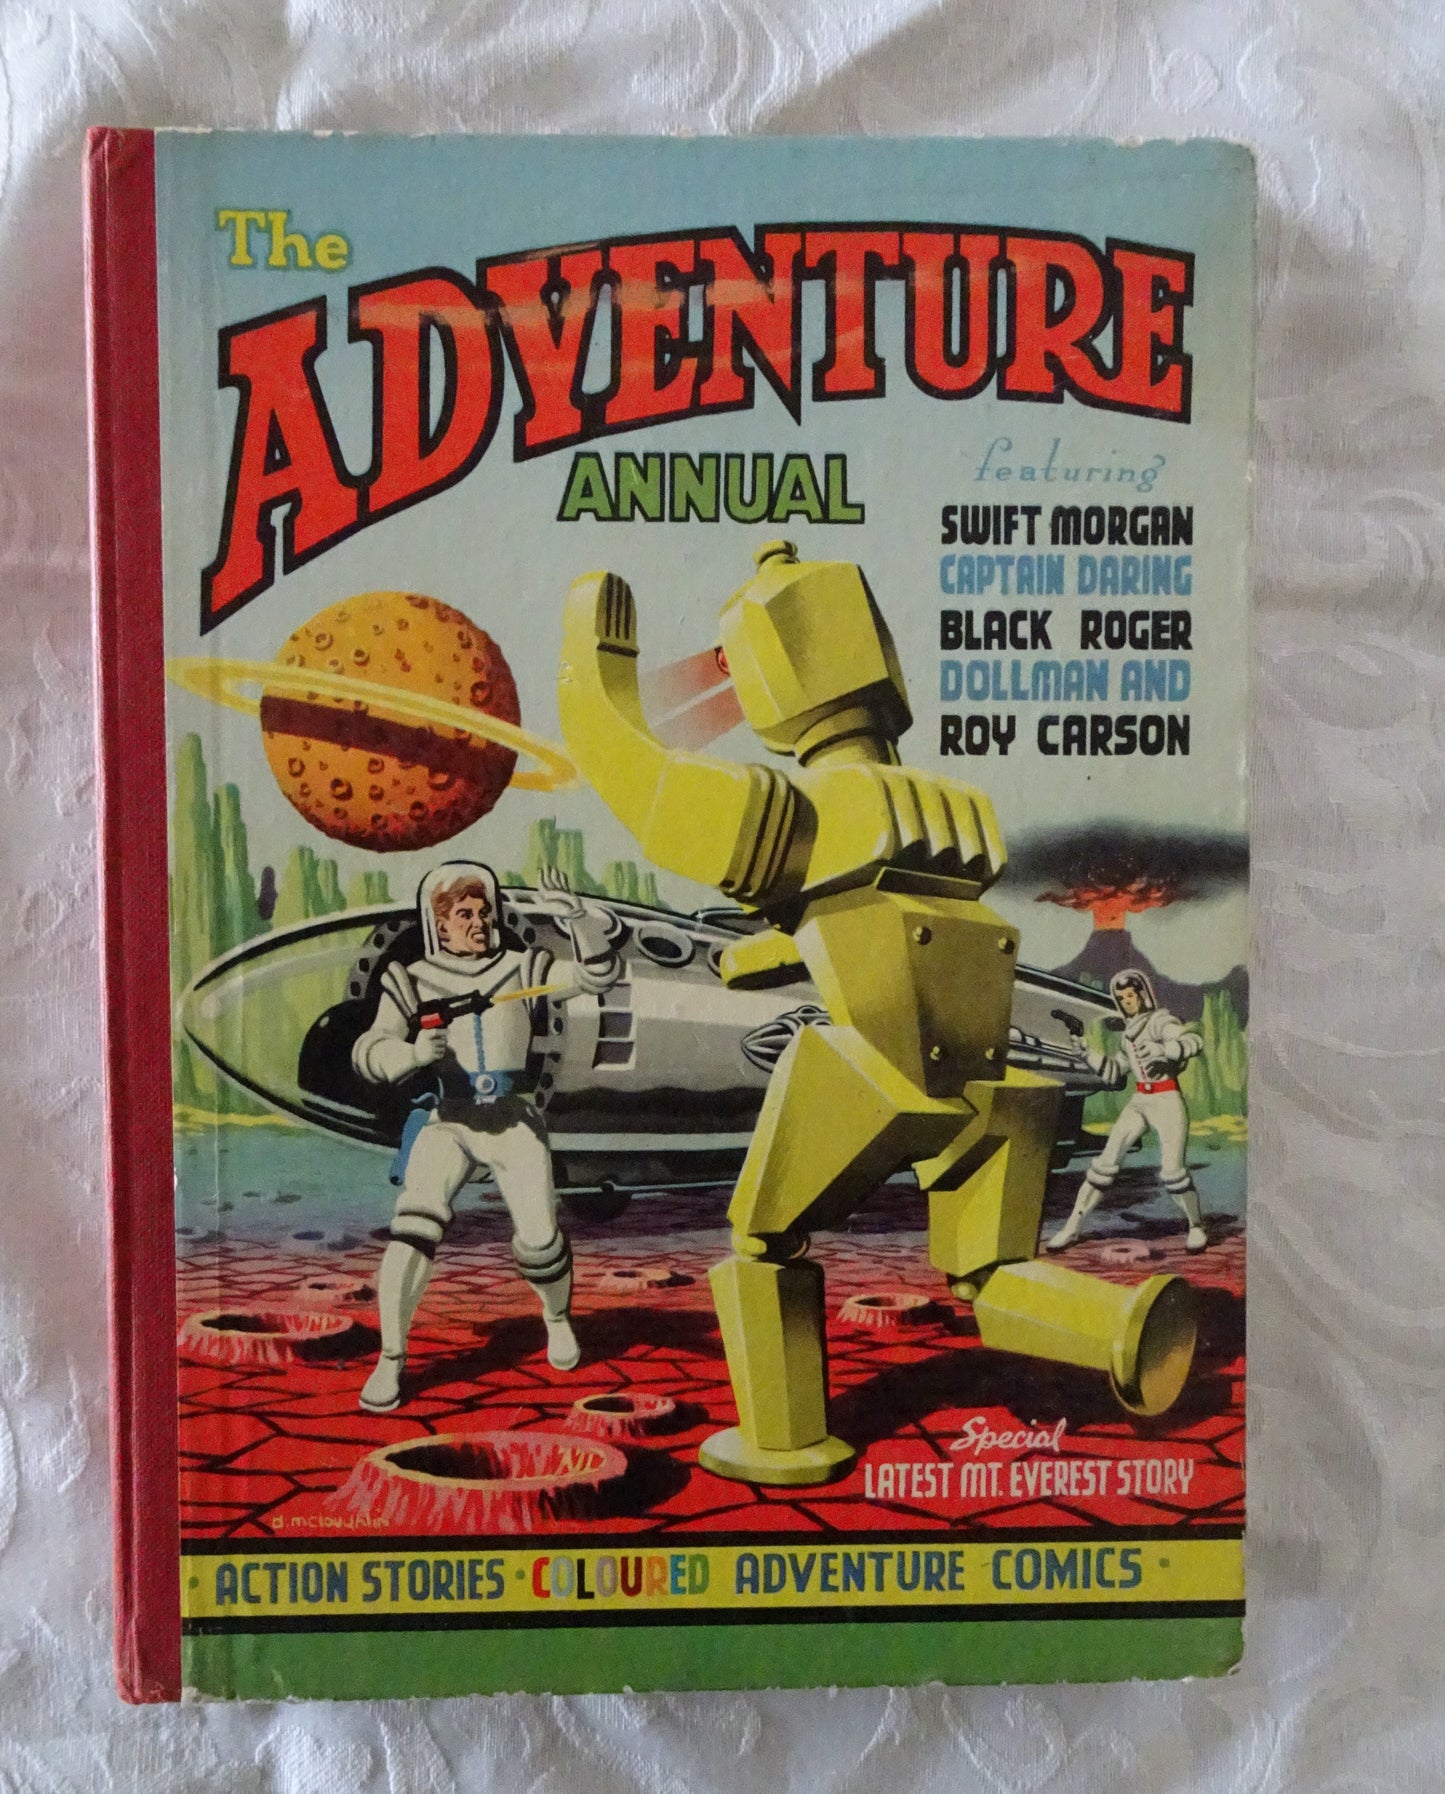 The Adventure Annual by The Popular Press